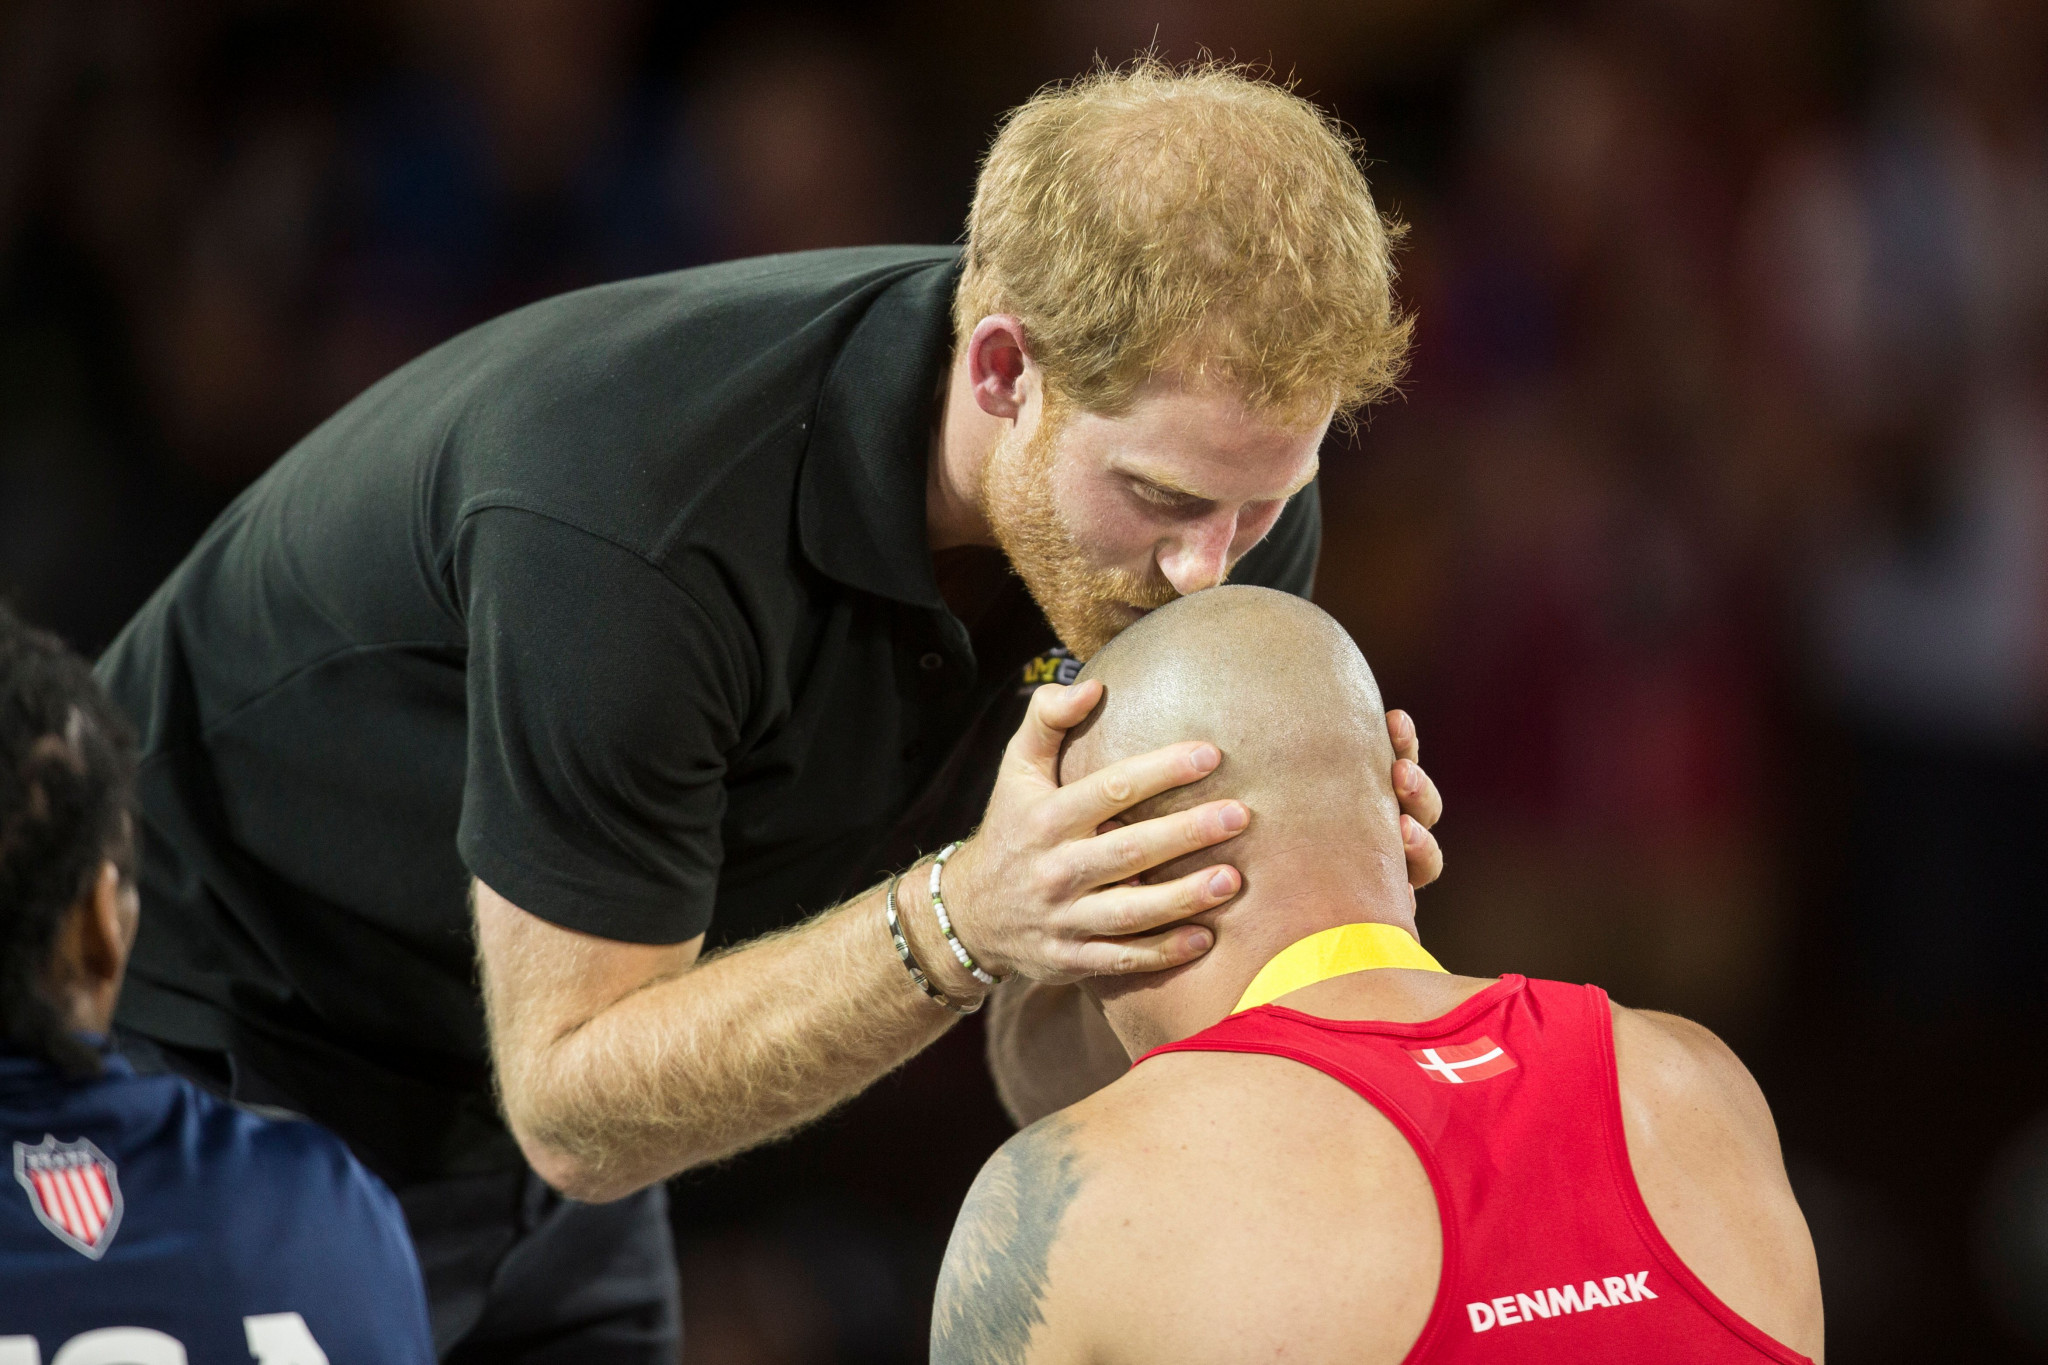 Prince Harry kissing wheelchair rugby gold medalist Maurice Manuel of Denmark in 2017 ©Getty Images